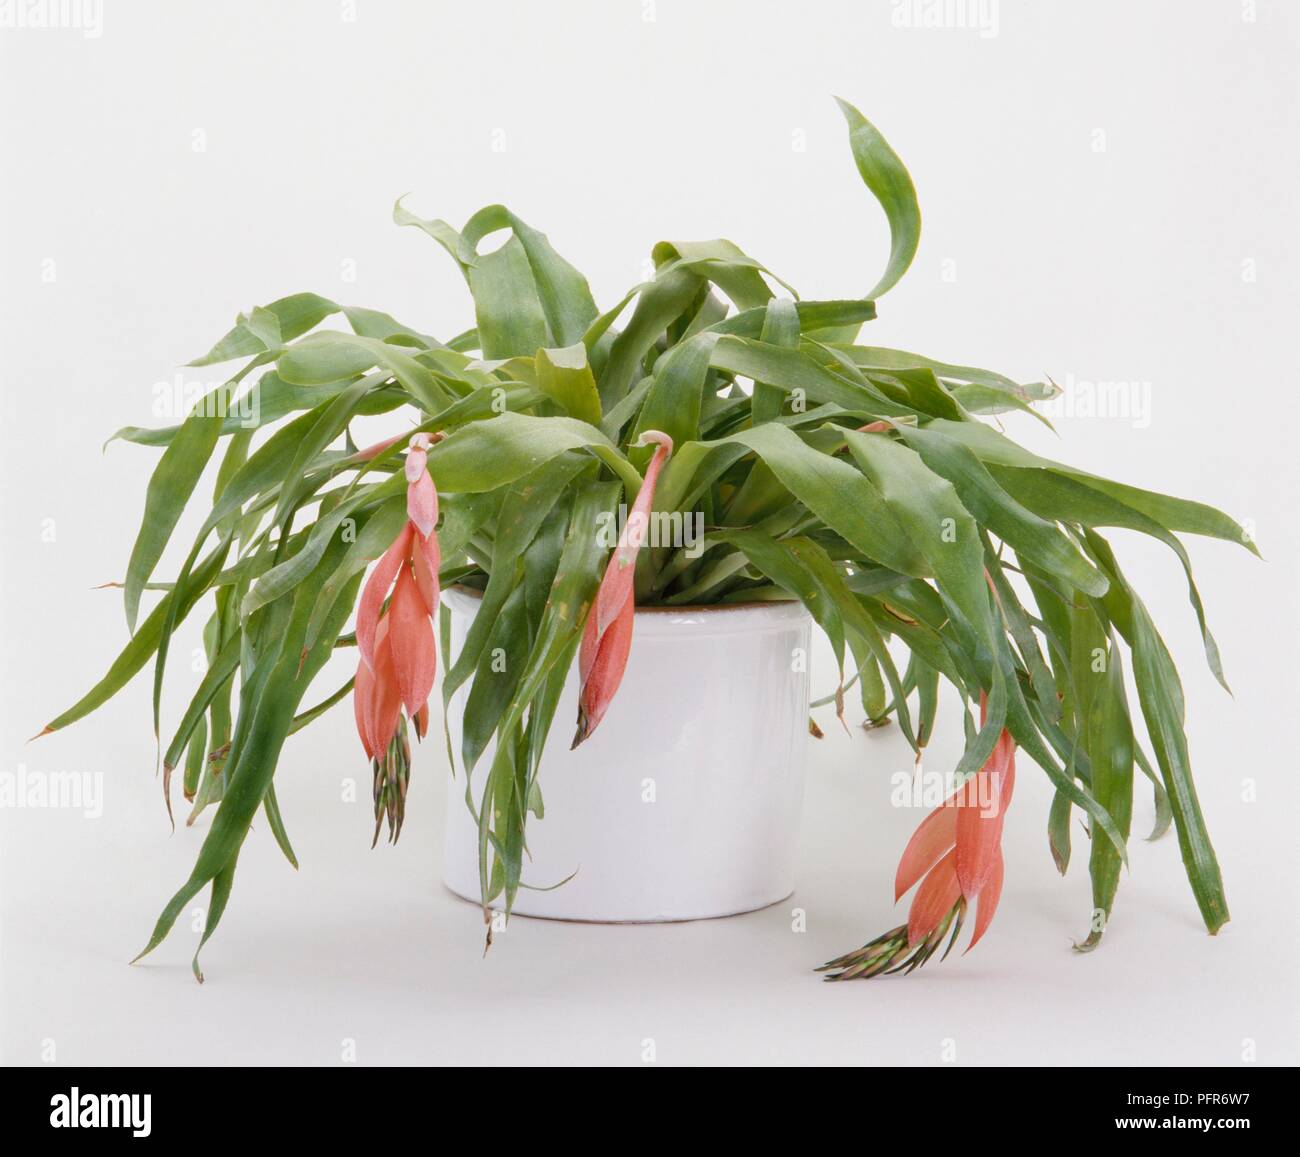 Billbergia nutans (Queen's Tears) hanging leaves interspersed with trailing bright pink brackets in white container Stock Photo